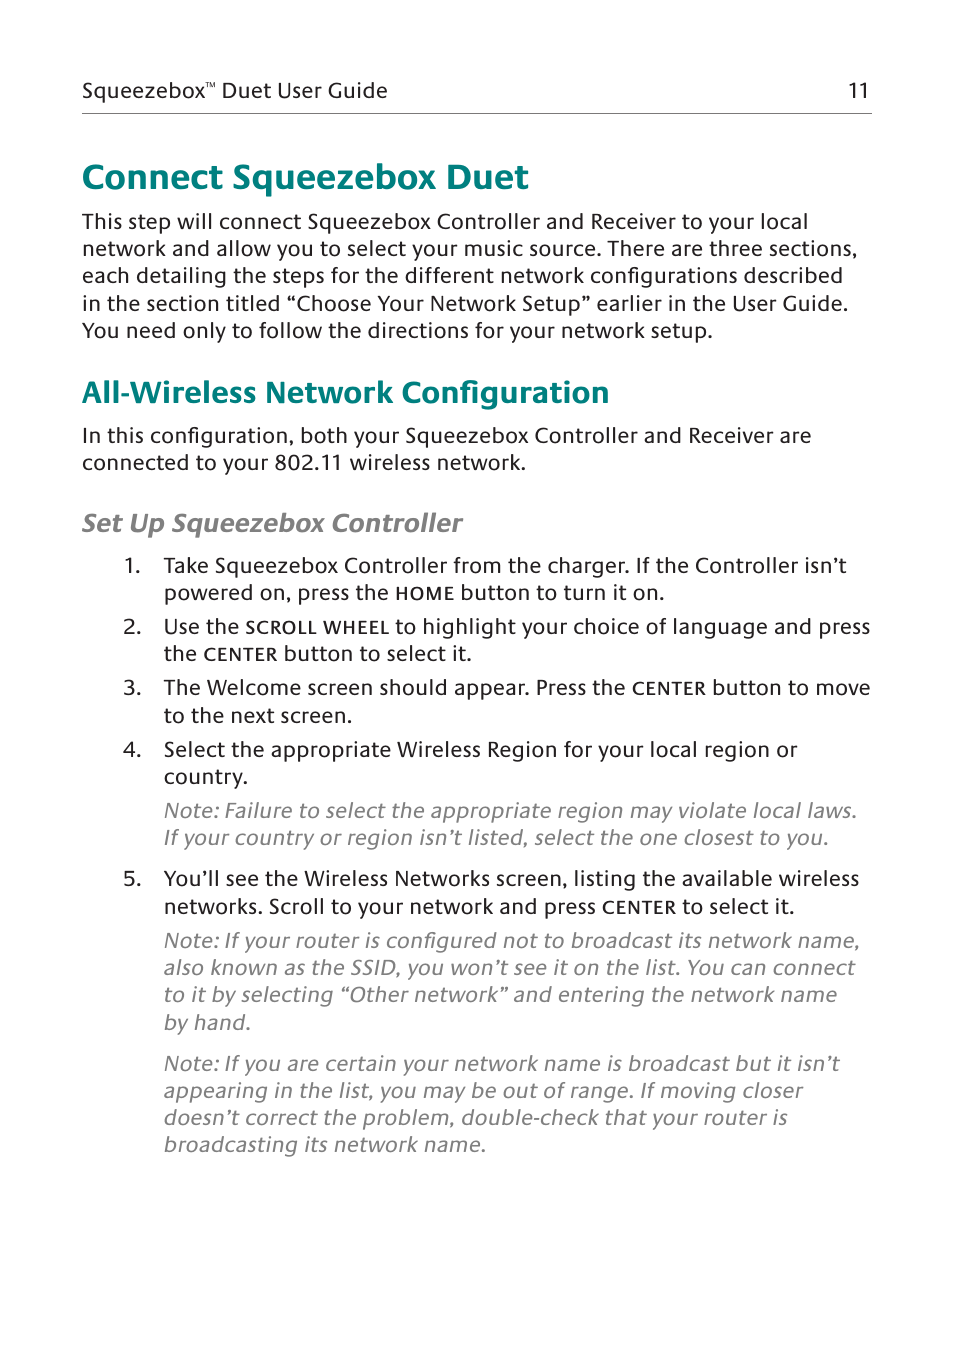 Connect squeezebox duet, All-wireless network configuration, Set up controller | Logitech Squeezebox Manual | Page 12 / 45